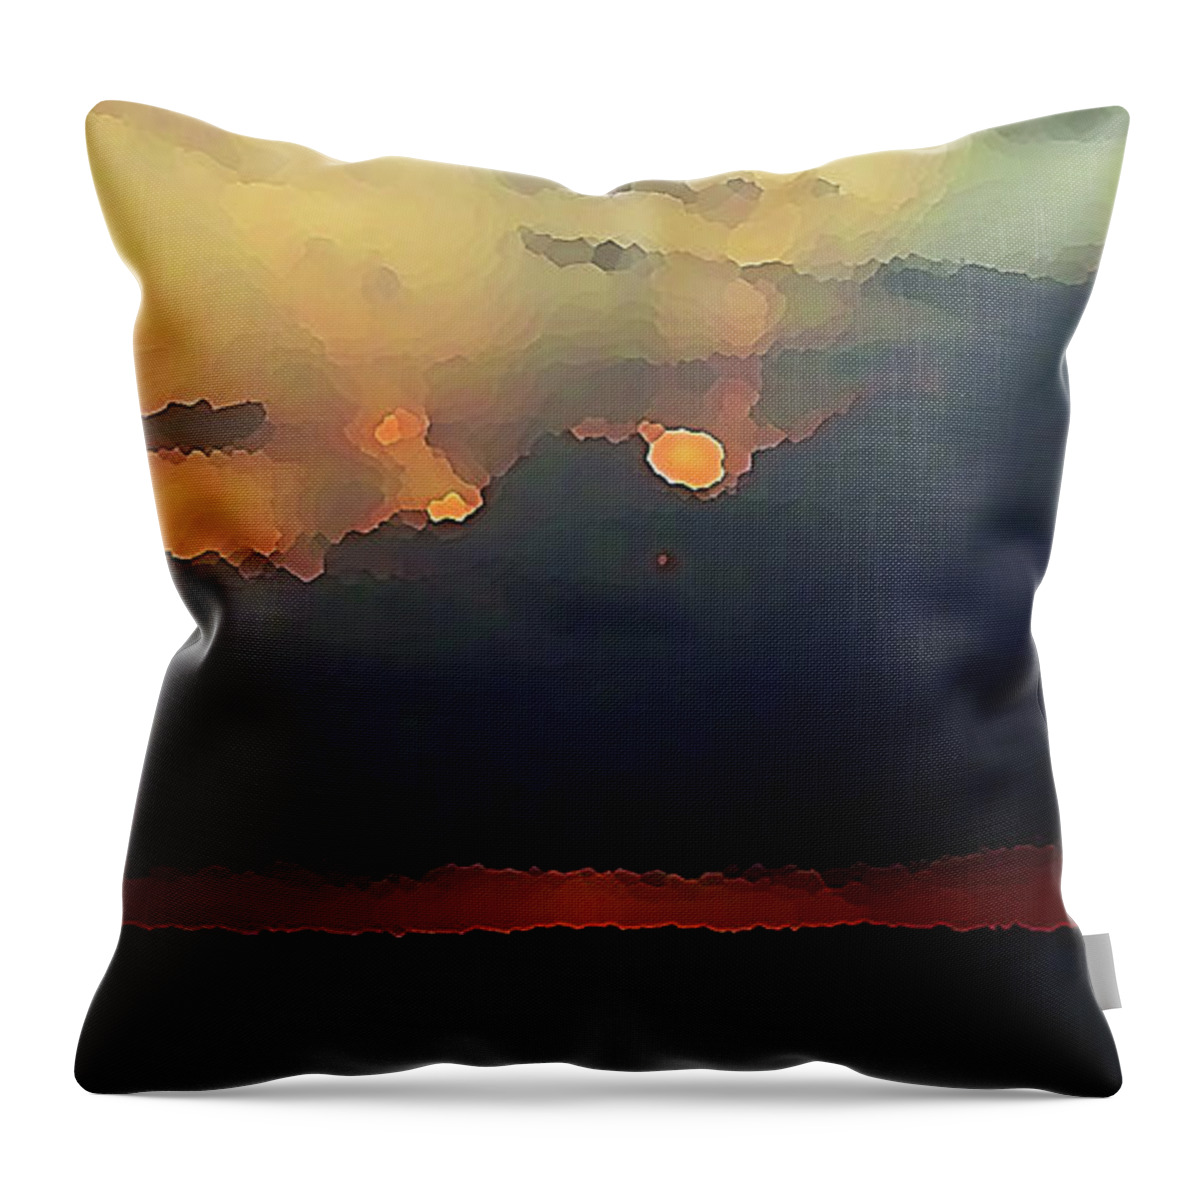 Digital Throw Pillow featuring the digital art Burnished Sky by Robin Webster